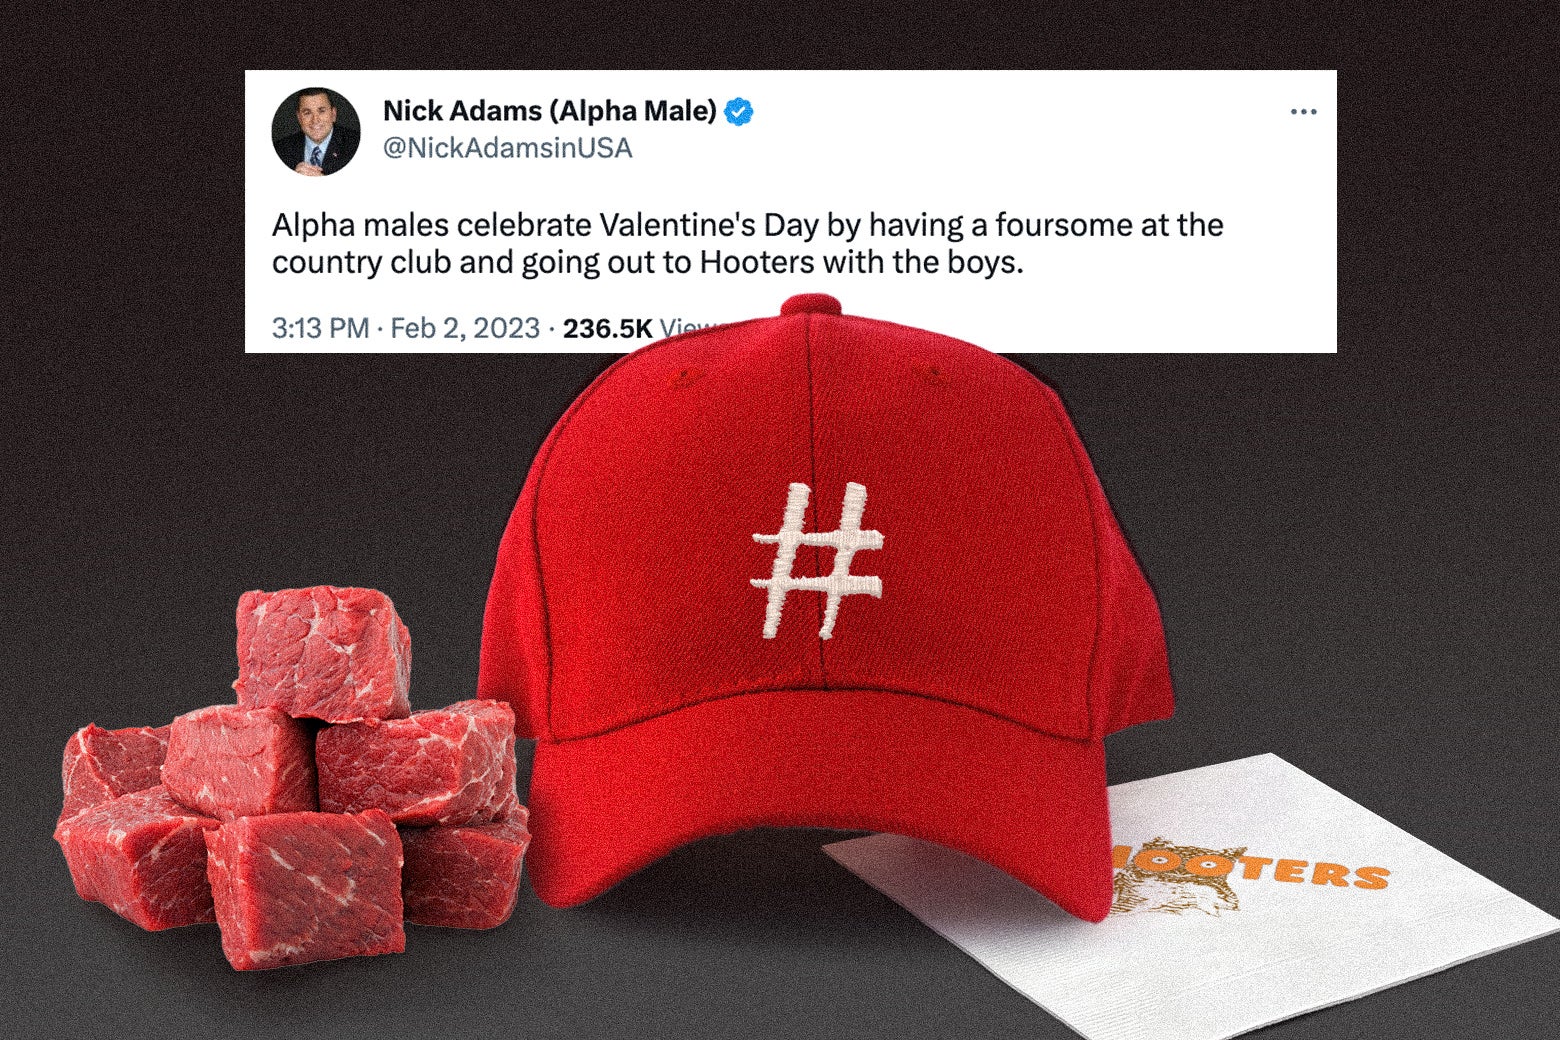 A collage of a red hat, raw meat, and a Hooters napkin.